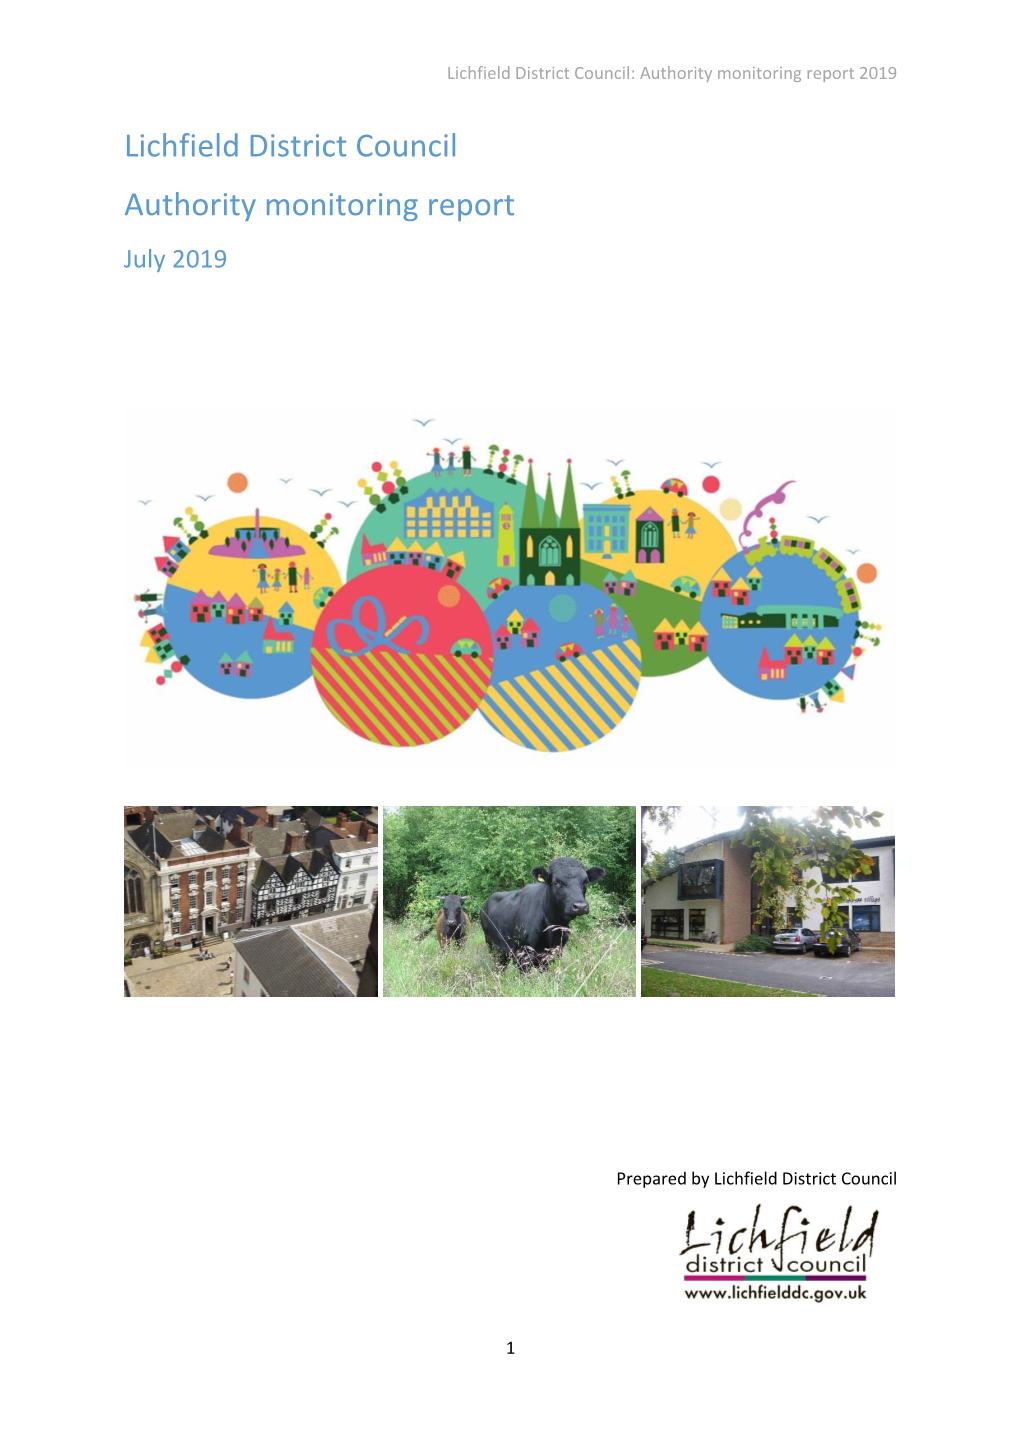 Authority Monitoring Report 2019